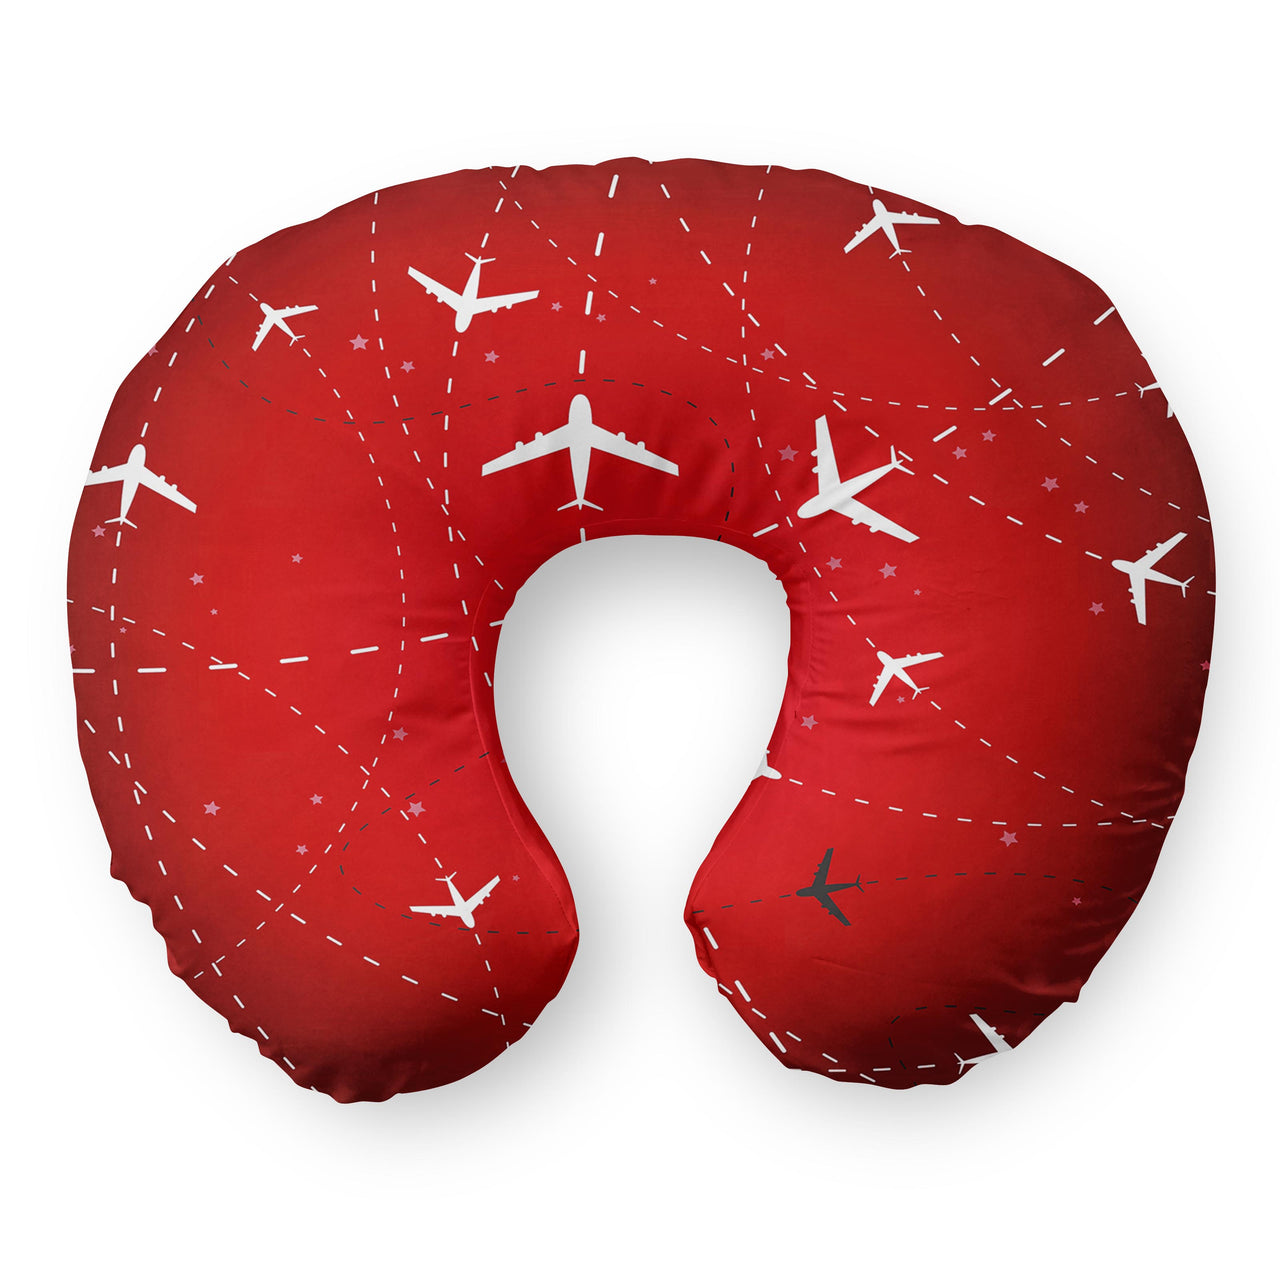 Travelling with Aircraft (Red) Travel & Boppy Pillows